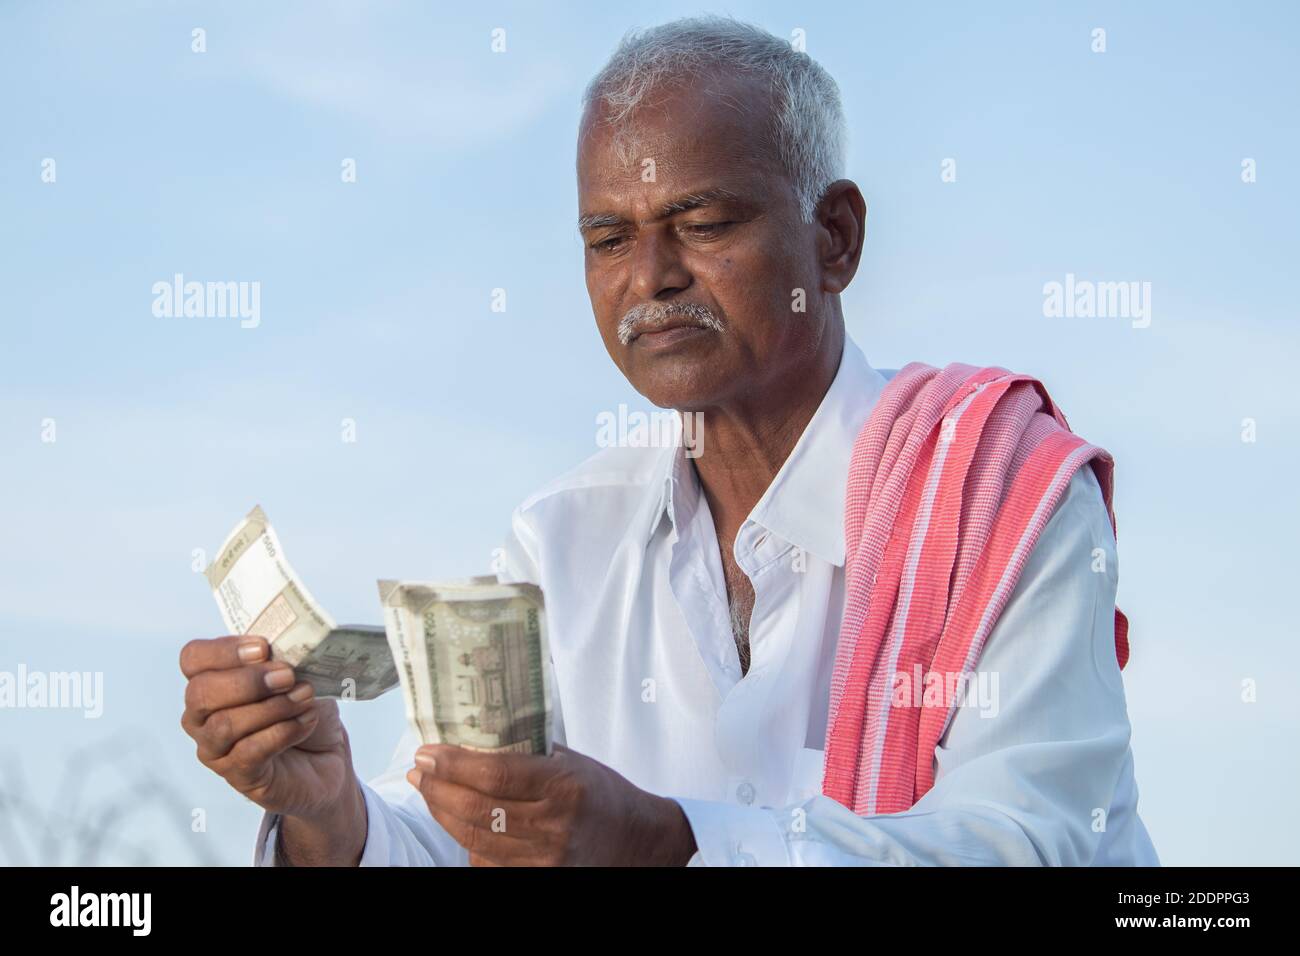 Indian Farmer angry about his income due to low crop yield, profit or loan repayment while counting money. Stock Photo